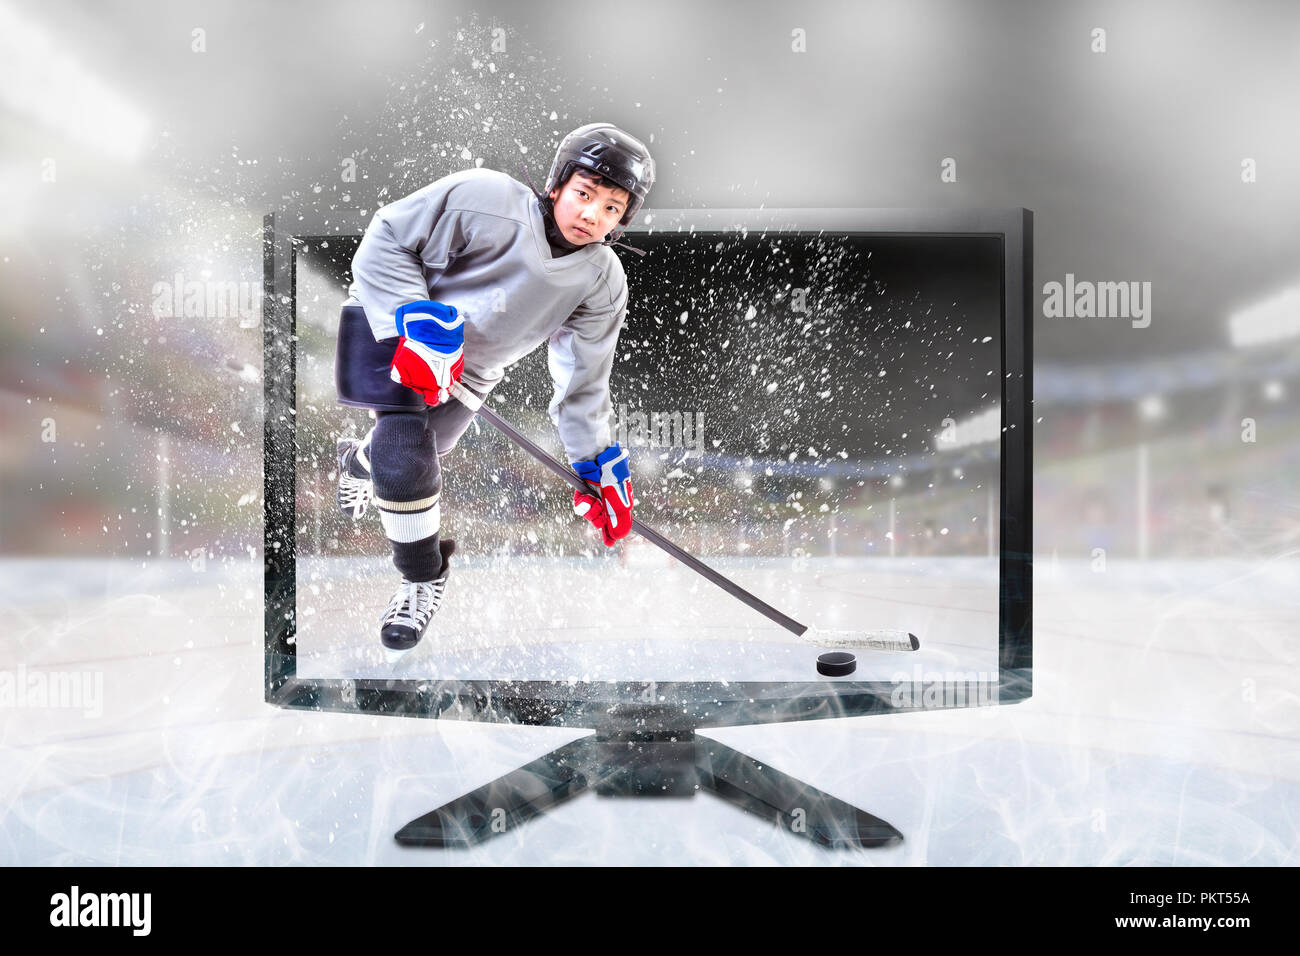 Junior ice hockey player in competitive sports gear standing inside brightly lit outdoor stadium on TV monitor